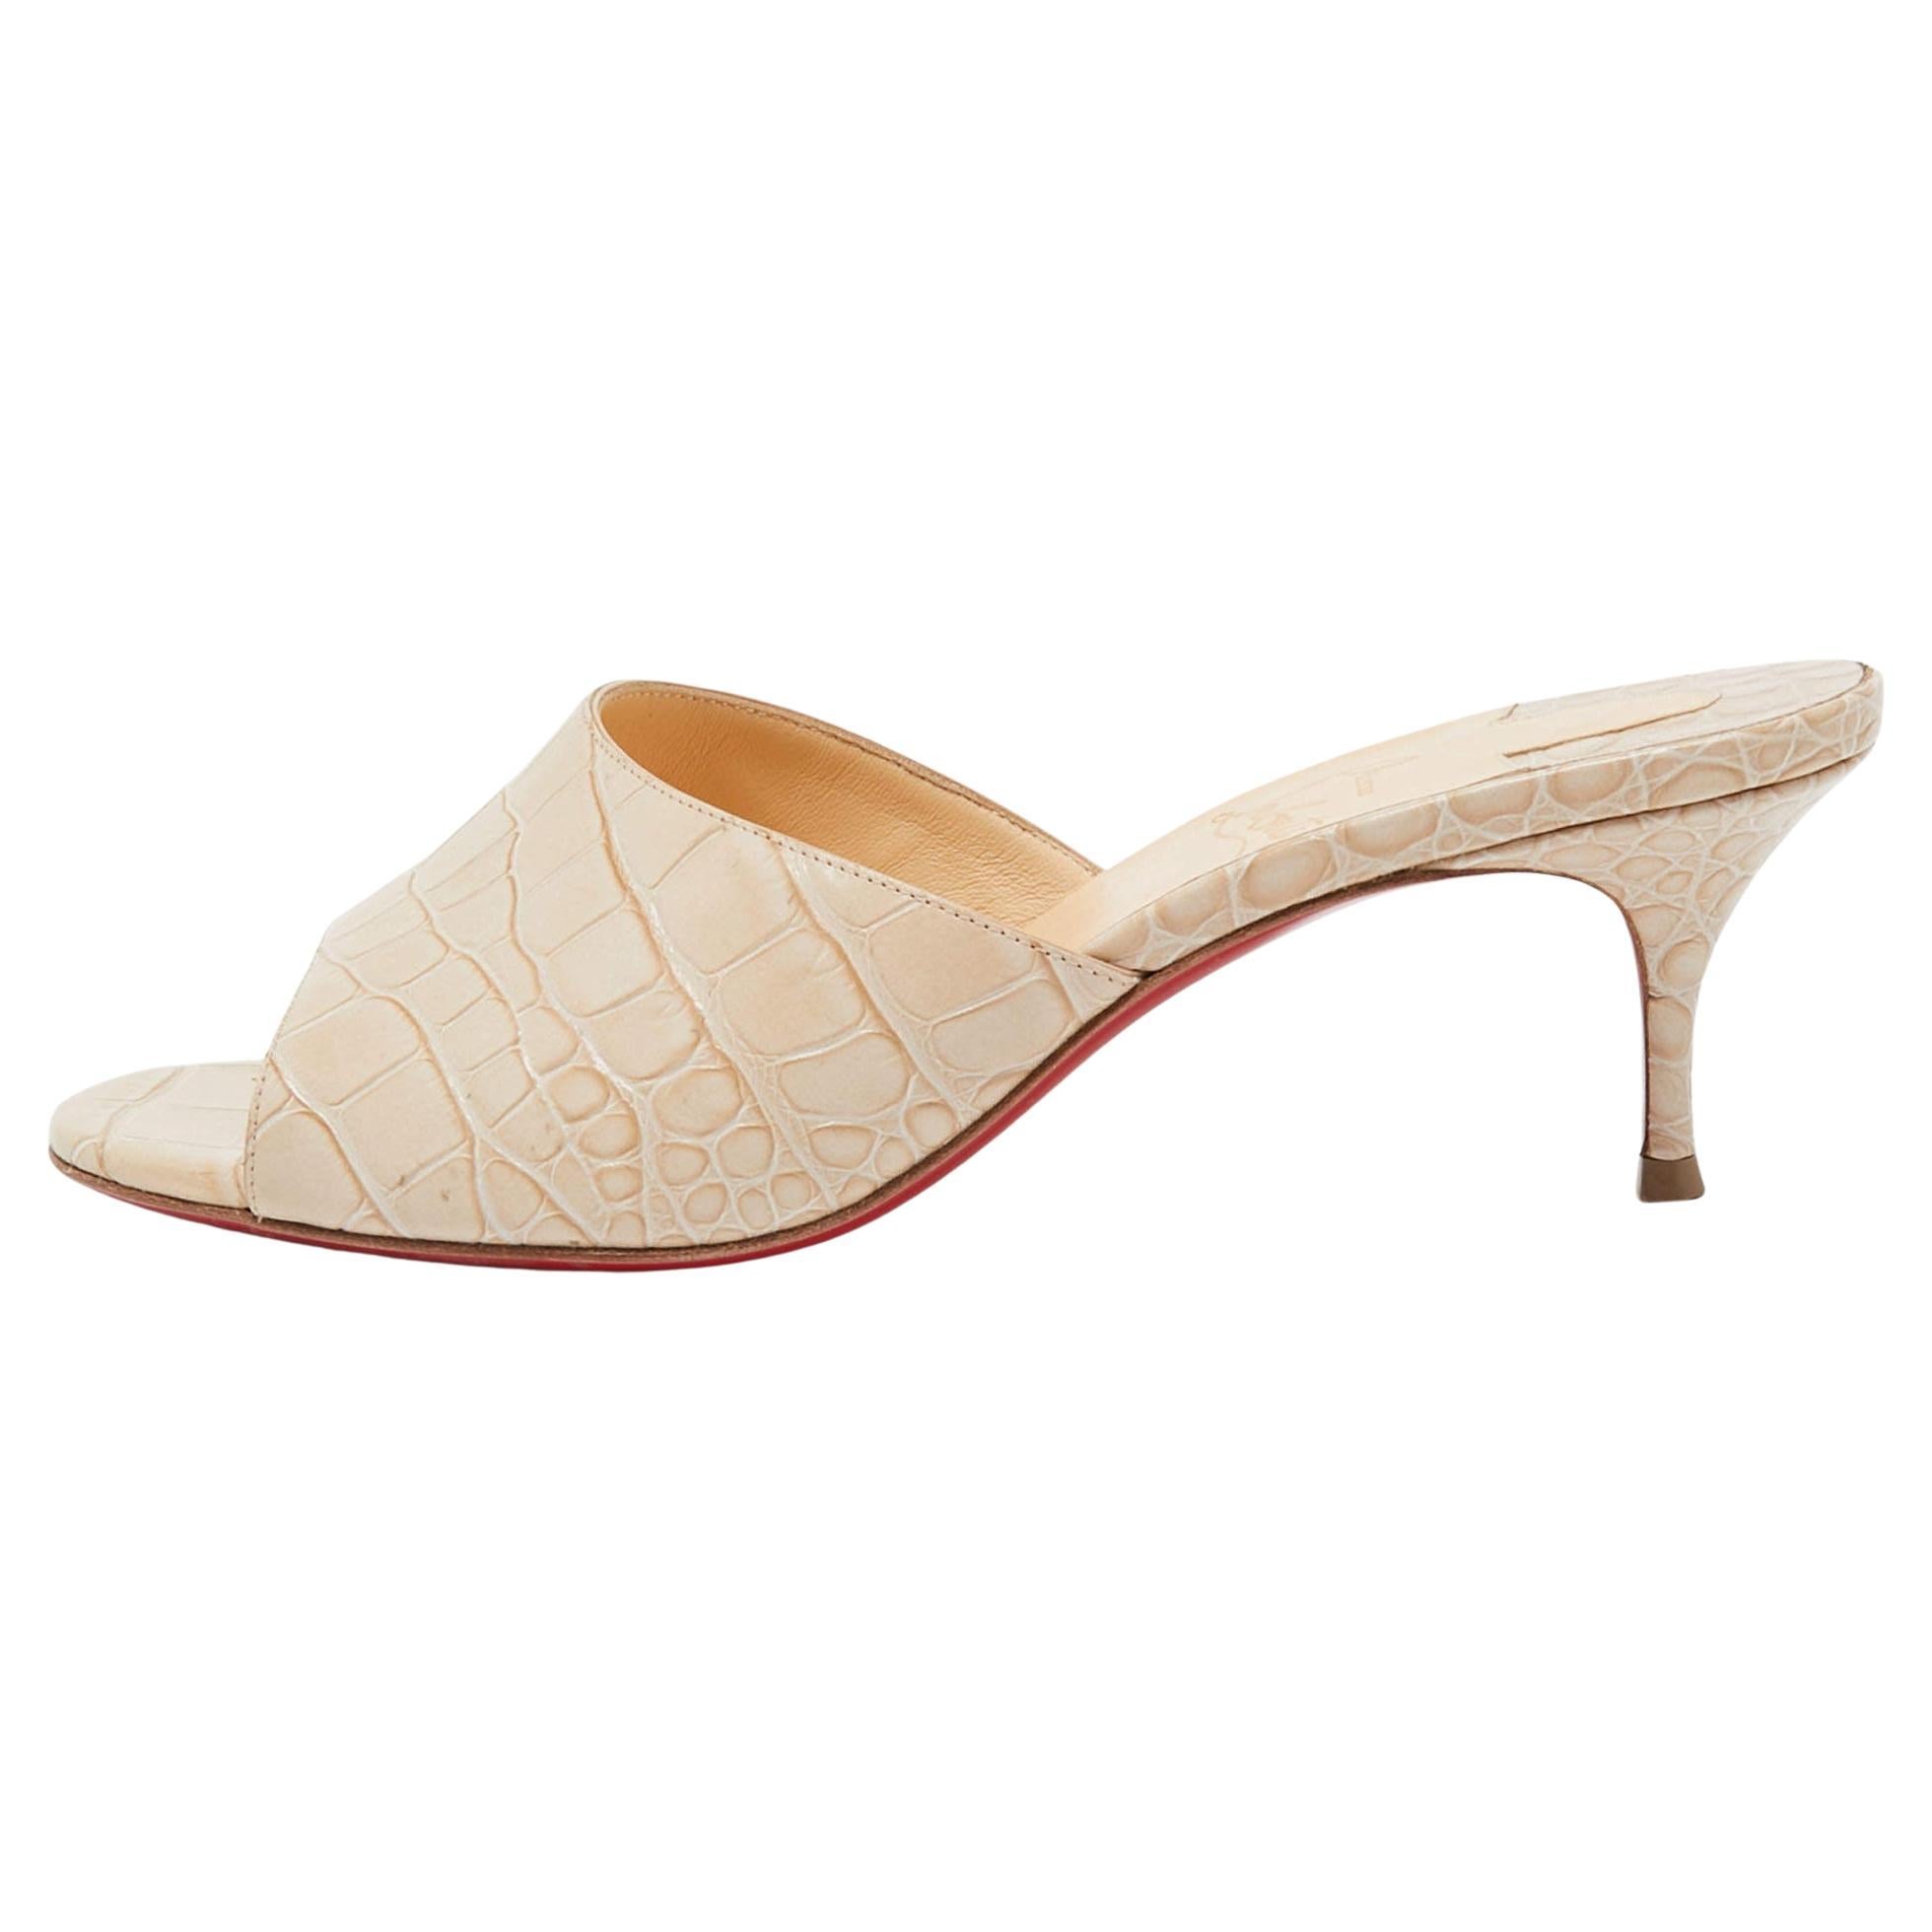 Christian Louboutin Beige Croc Embossed Leather East Slide Sandals Size 37 For Sale